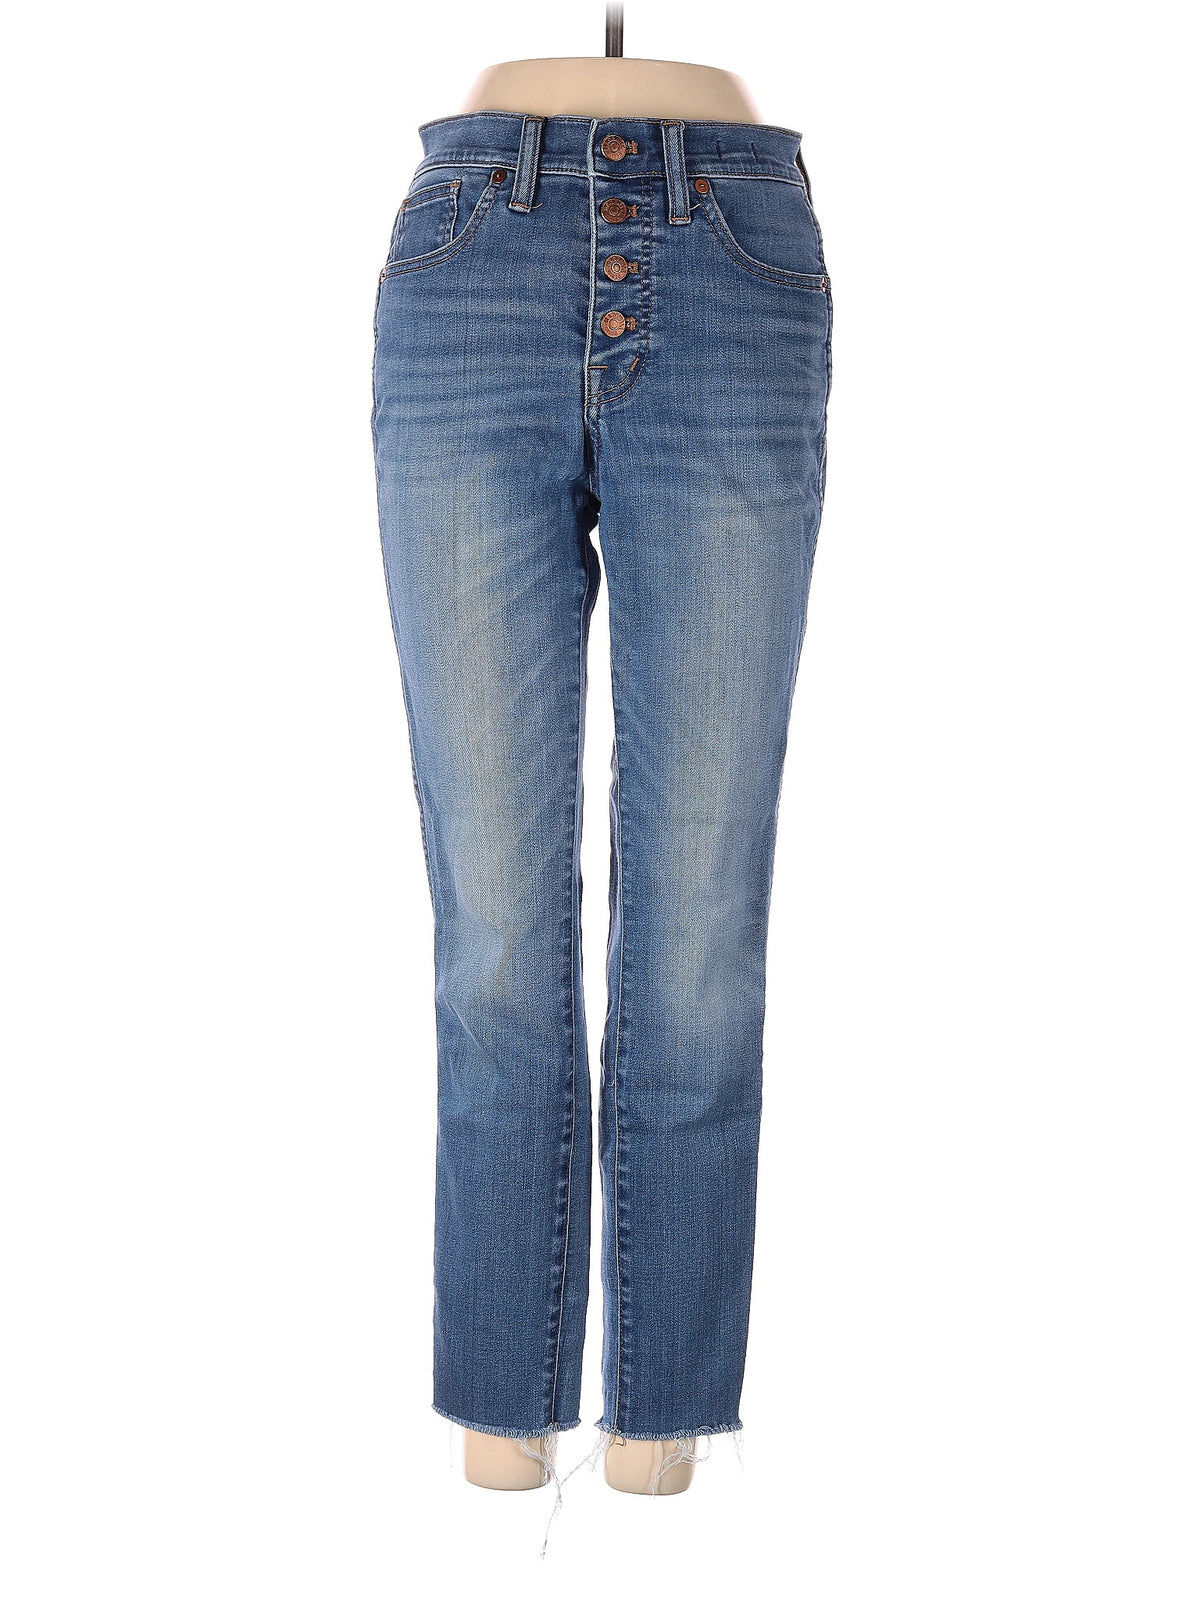 High-Rise Straight-leg 10" High-Rise Skinny Crop Jeans: Button-Front TENCEL&trade; Denim Edition in Light Wash waist size - 26